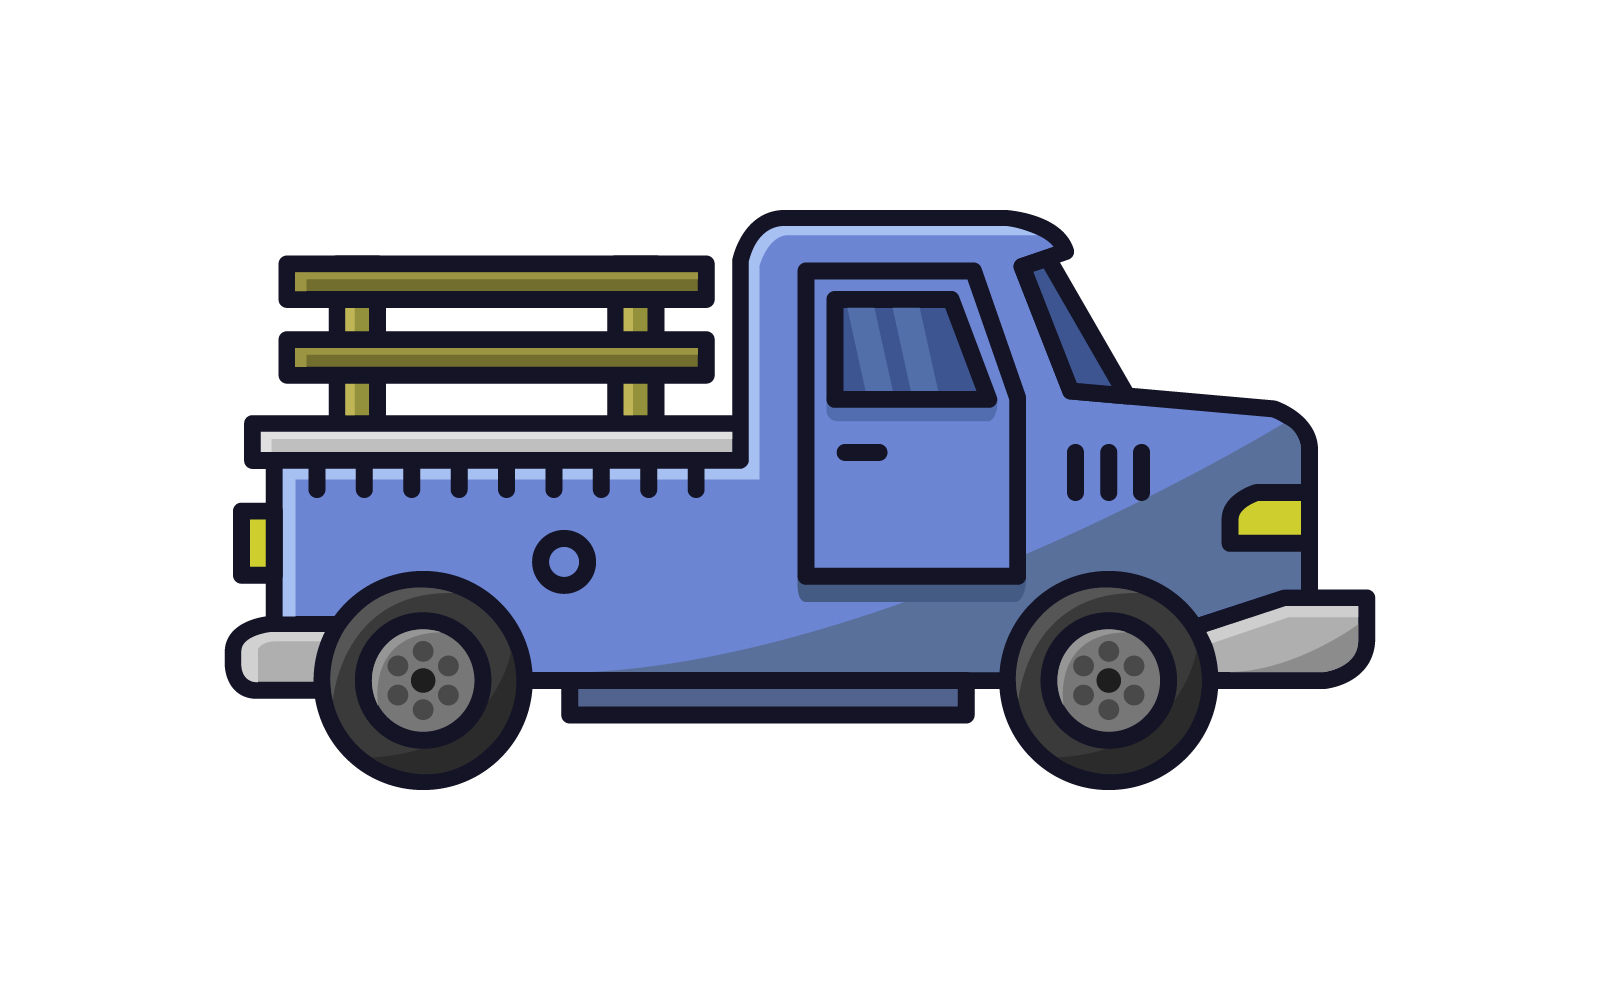 Truck  in vector on a white background